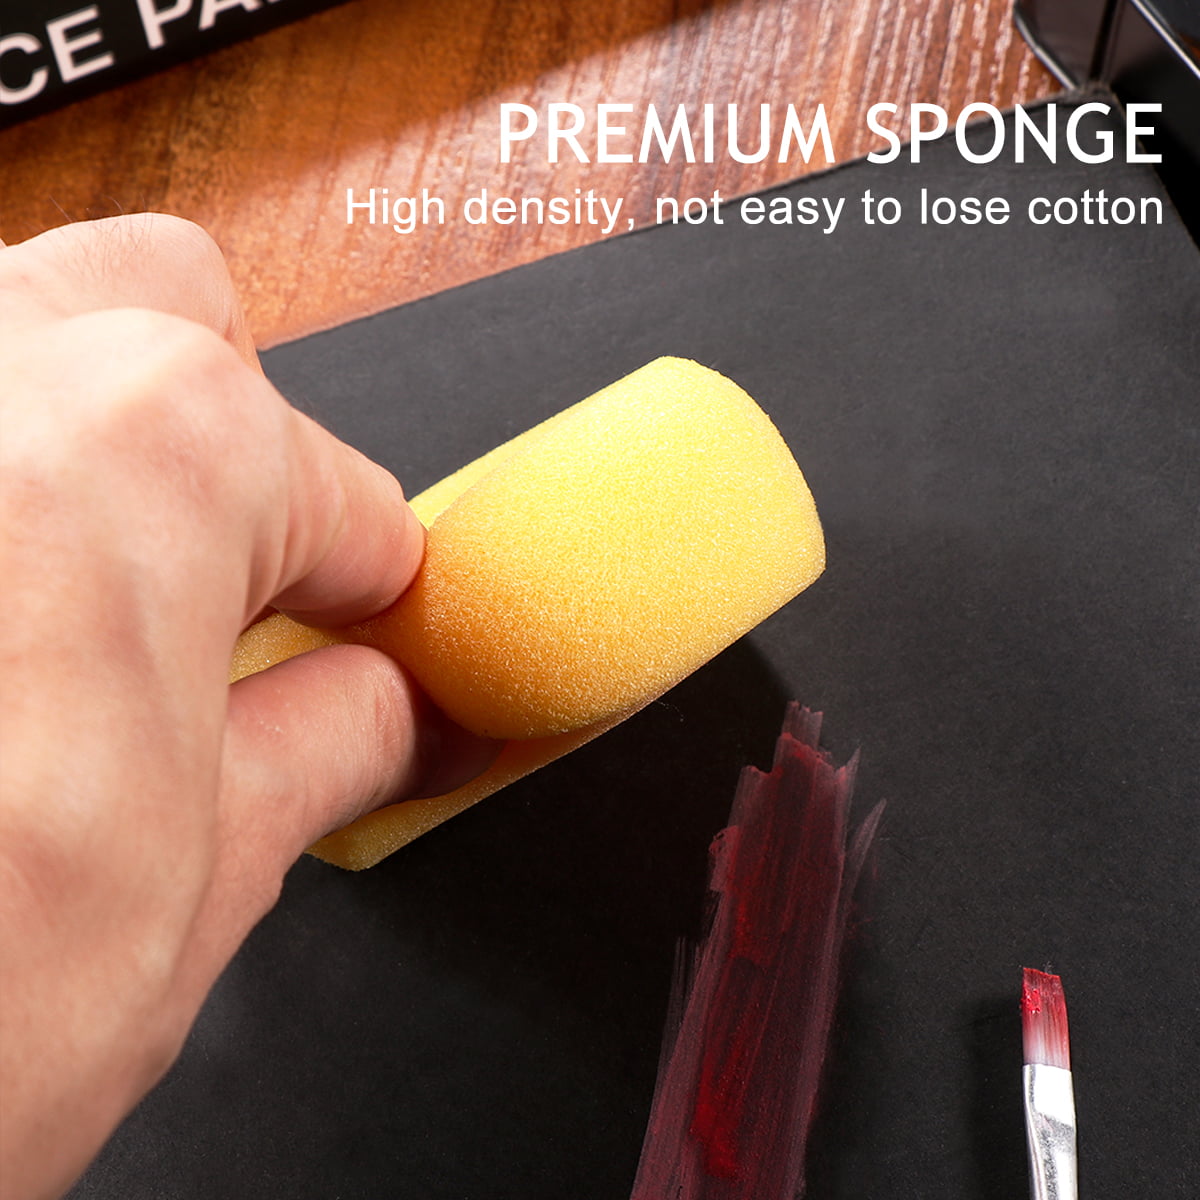 Paint Round Sponge Tool Potter's Sponges 12pcs Round Synthetic Watercolor Artist Sponges for Painting Crafts Pottery Yellow 